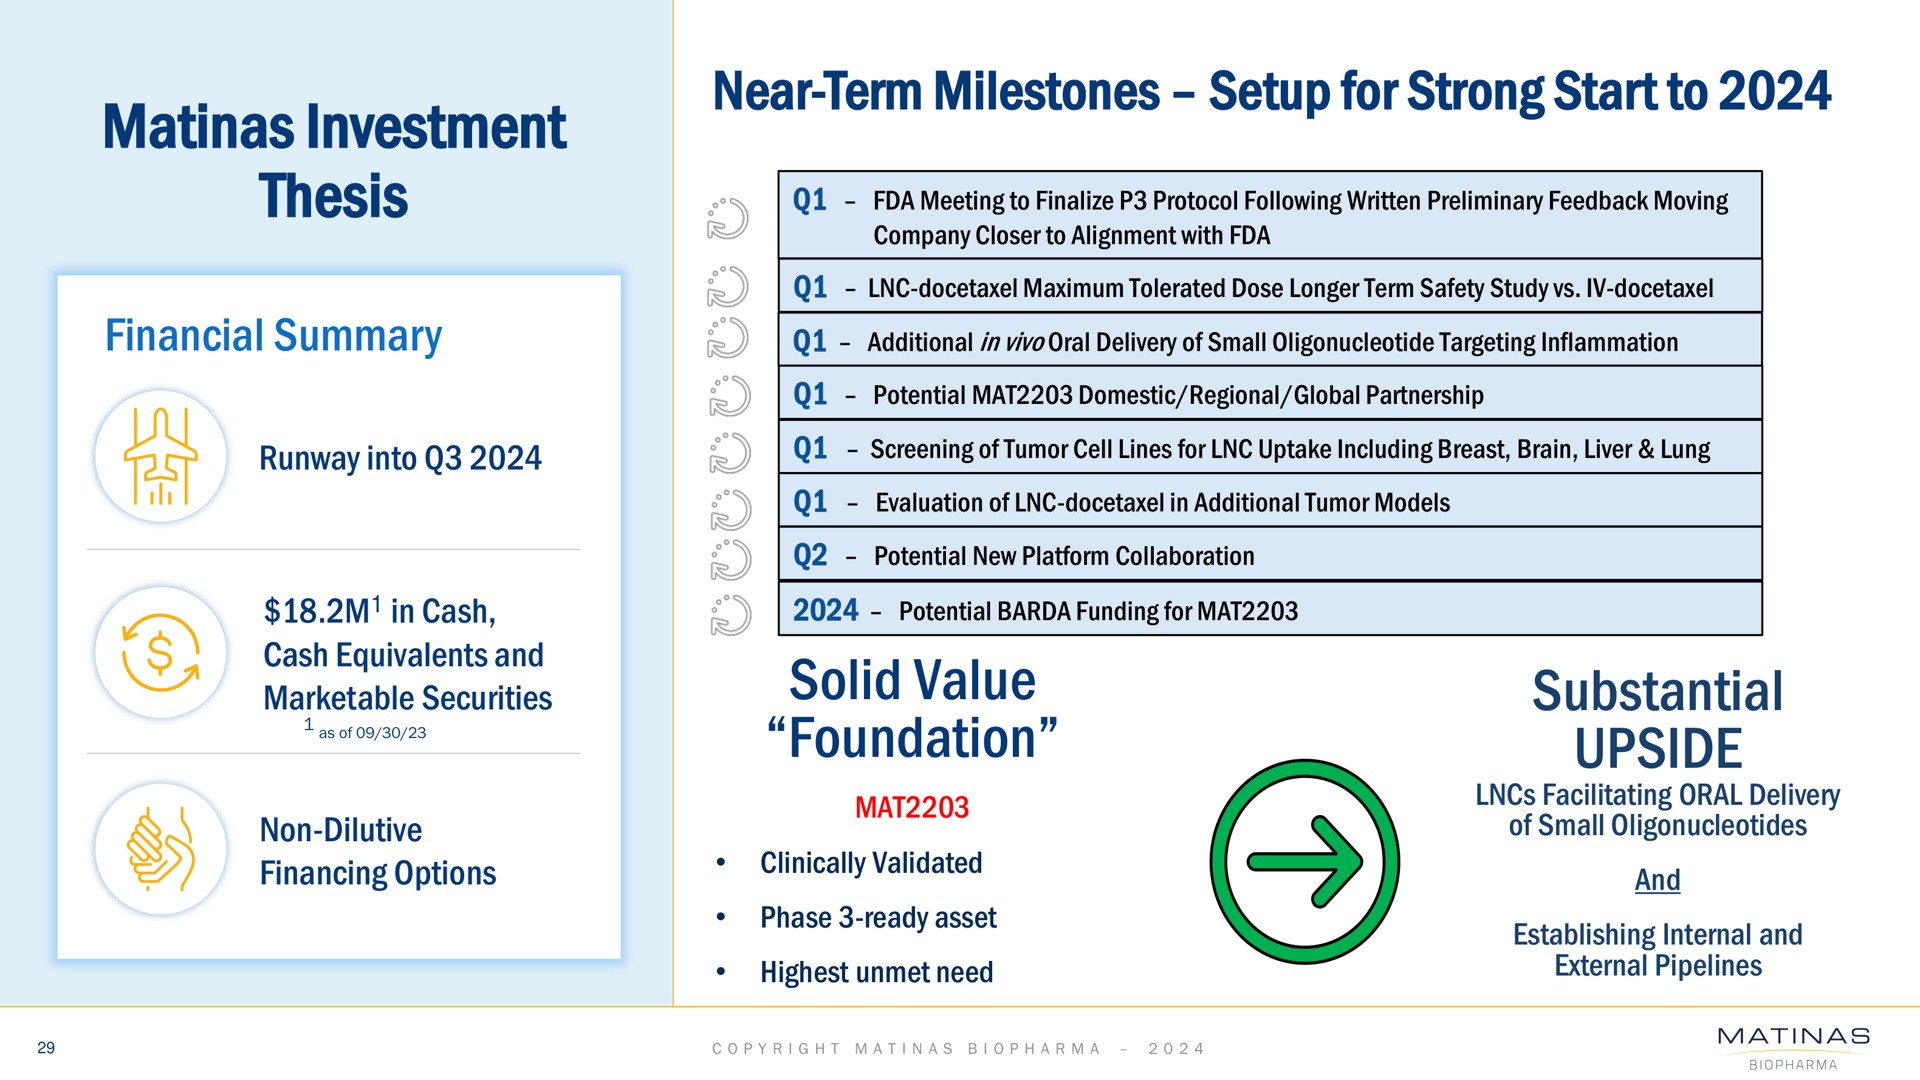 investment thesis financial summary near term milestones setup for strong start to solid value foundation substantial upside | Matinas BioPharma